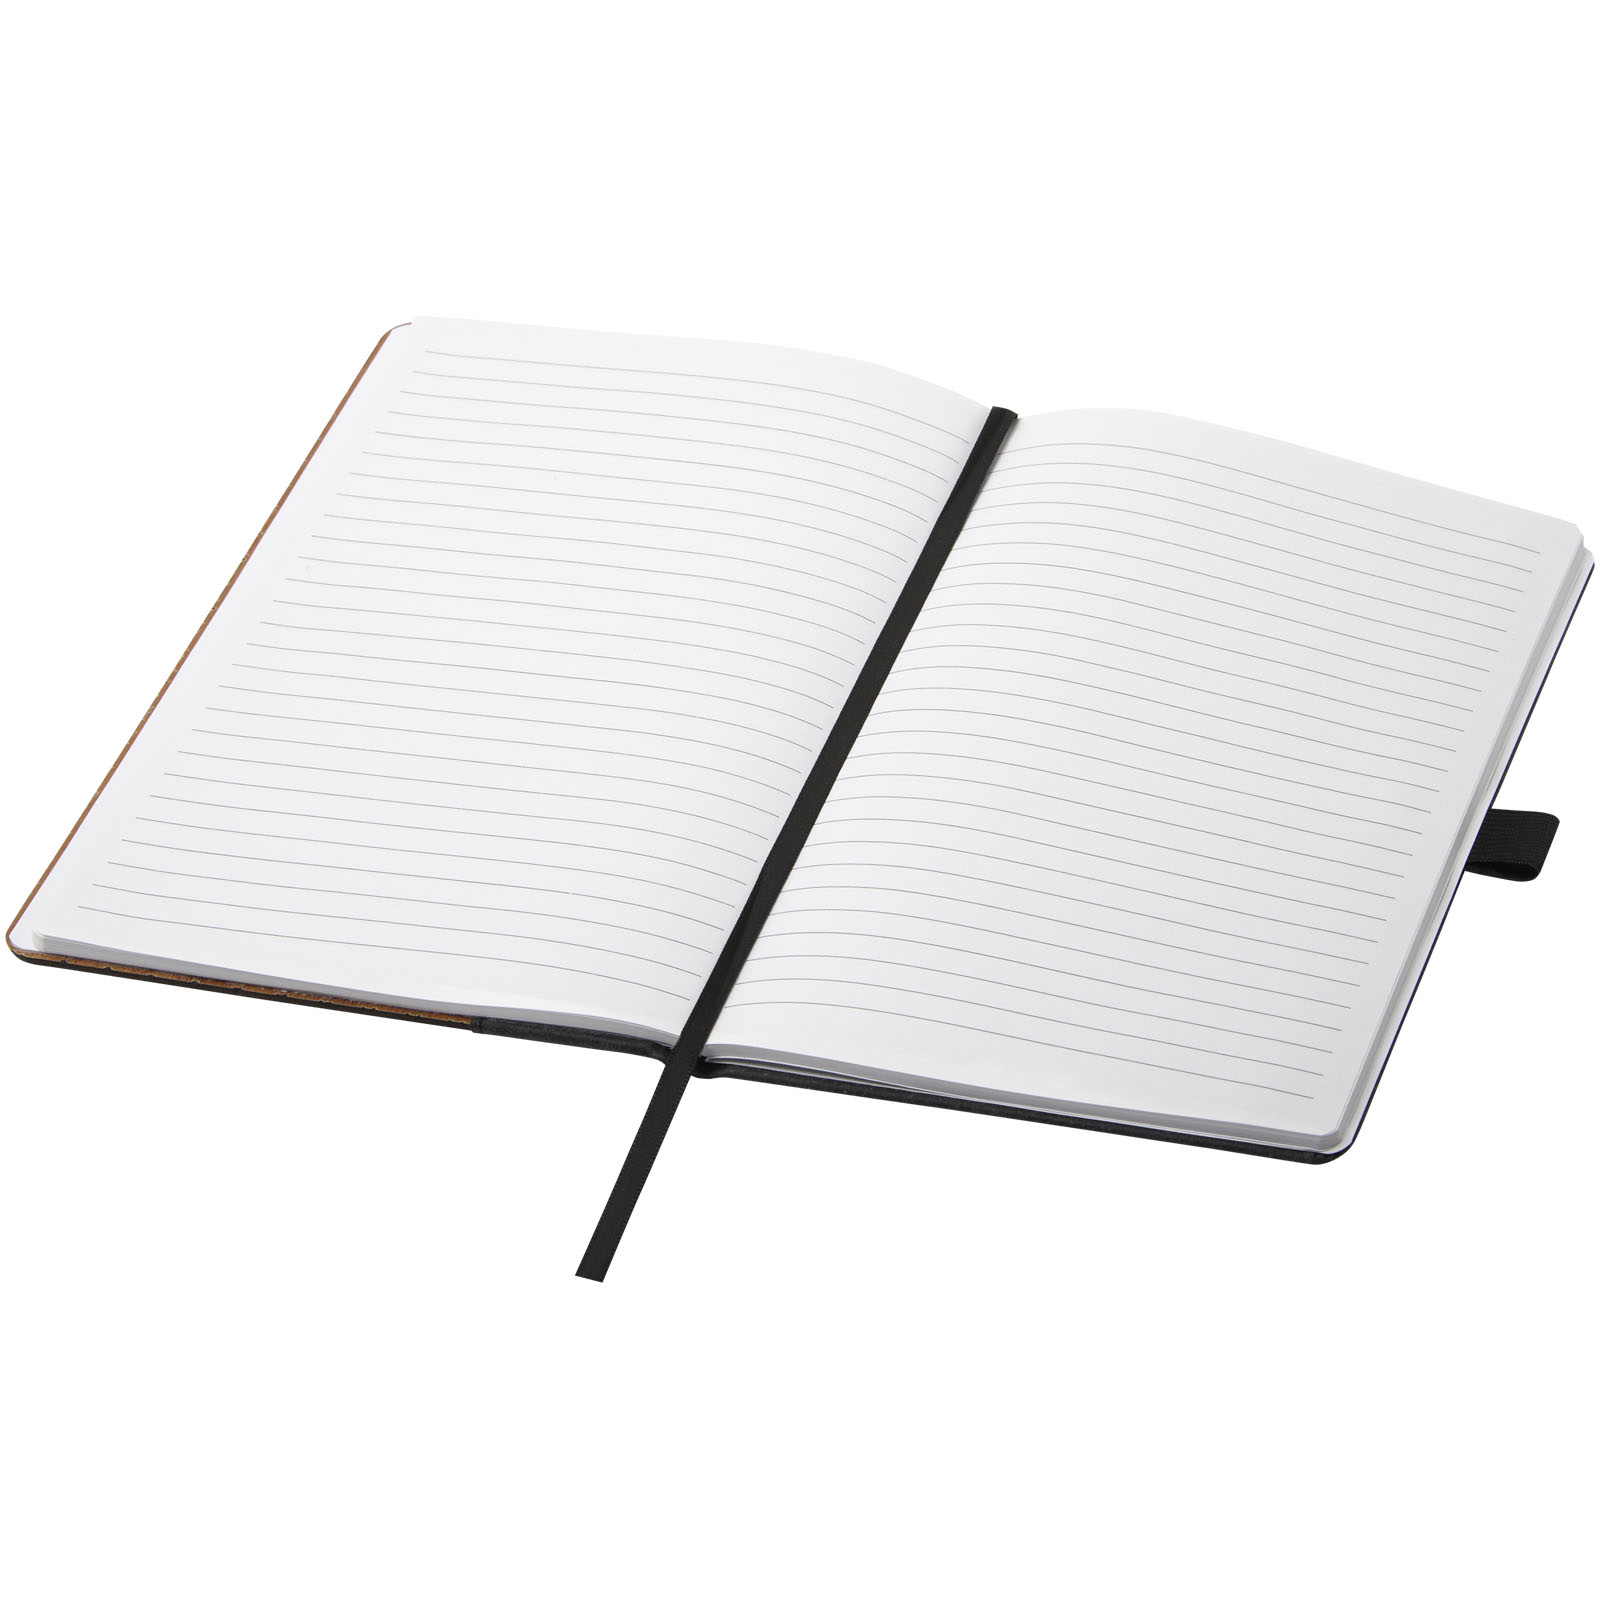 Advertising Hard cover notebooks - Note A5 bamboo notebook - 3